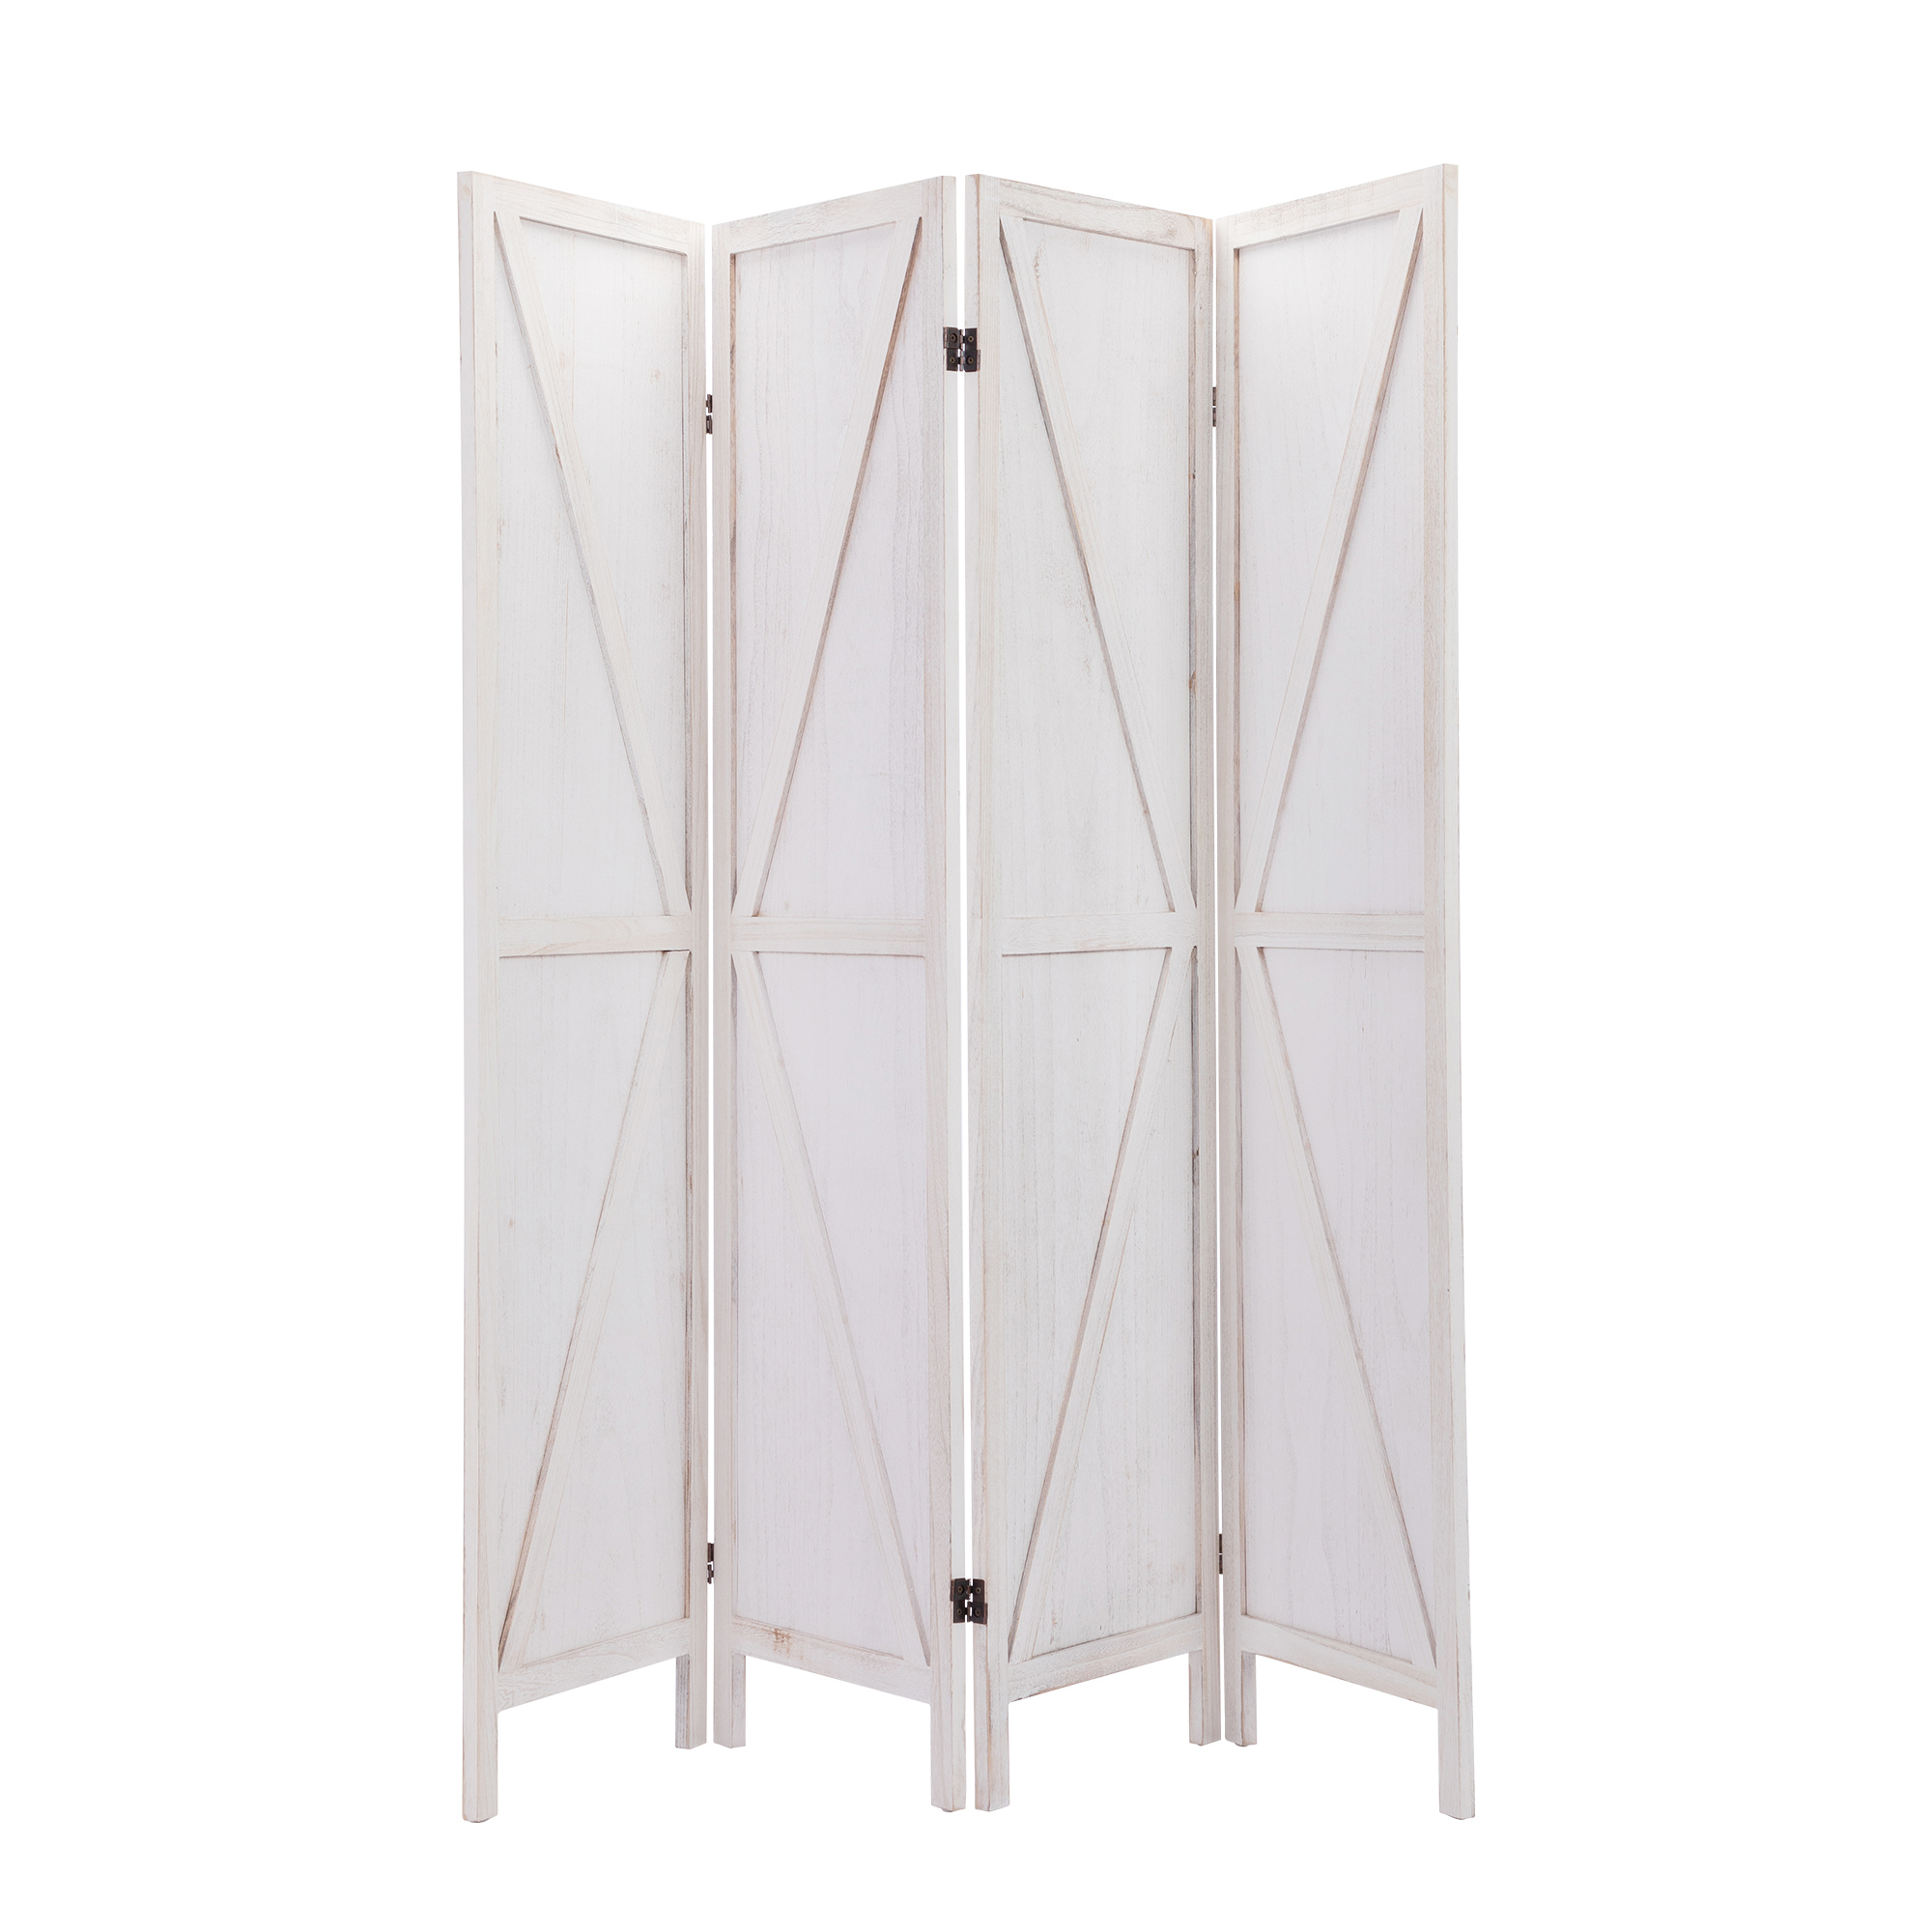 UWR-Nite Room dividers and Folding Privacy Screens, Privacy Screen, Partition Wall dividers for Rooms, Room Separator, Temporary Wall, Folding Screen - image 4 of 7